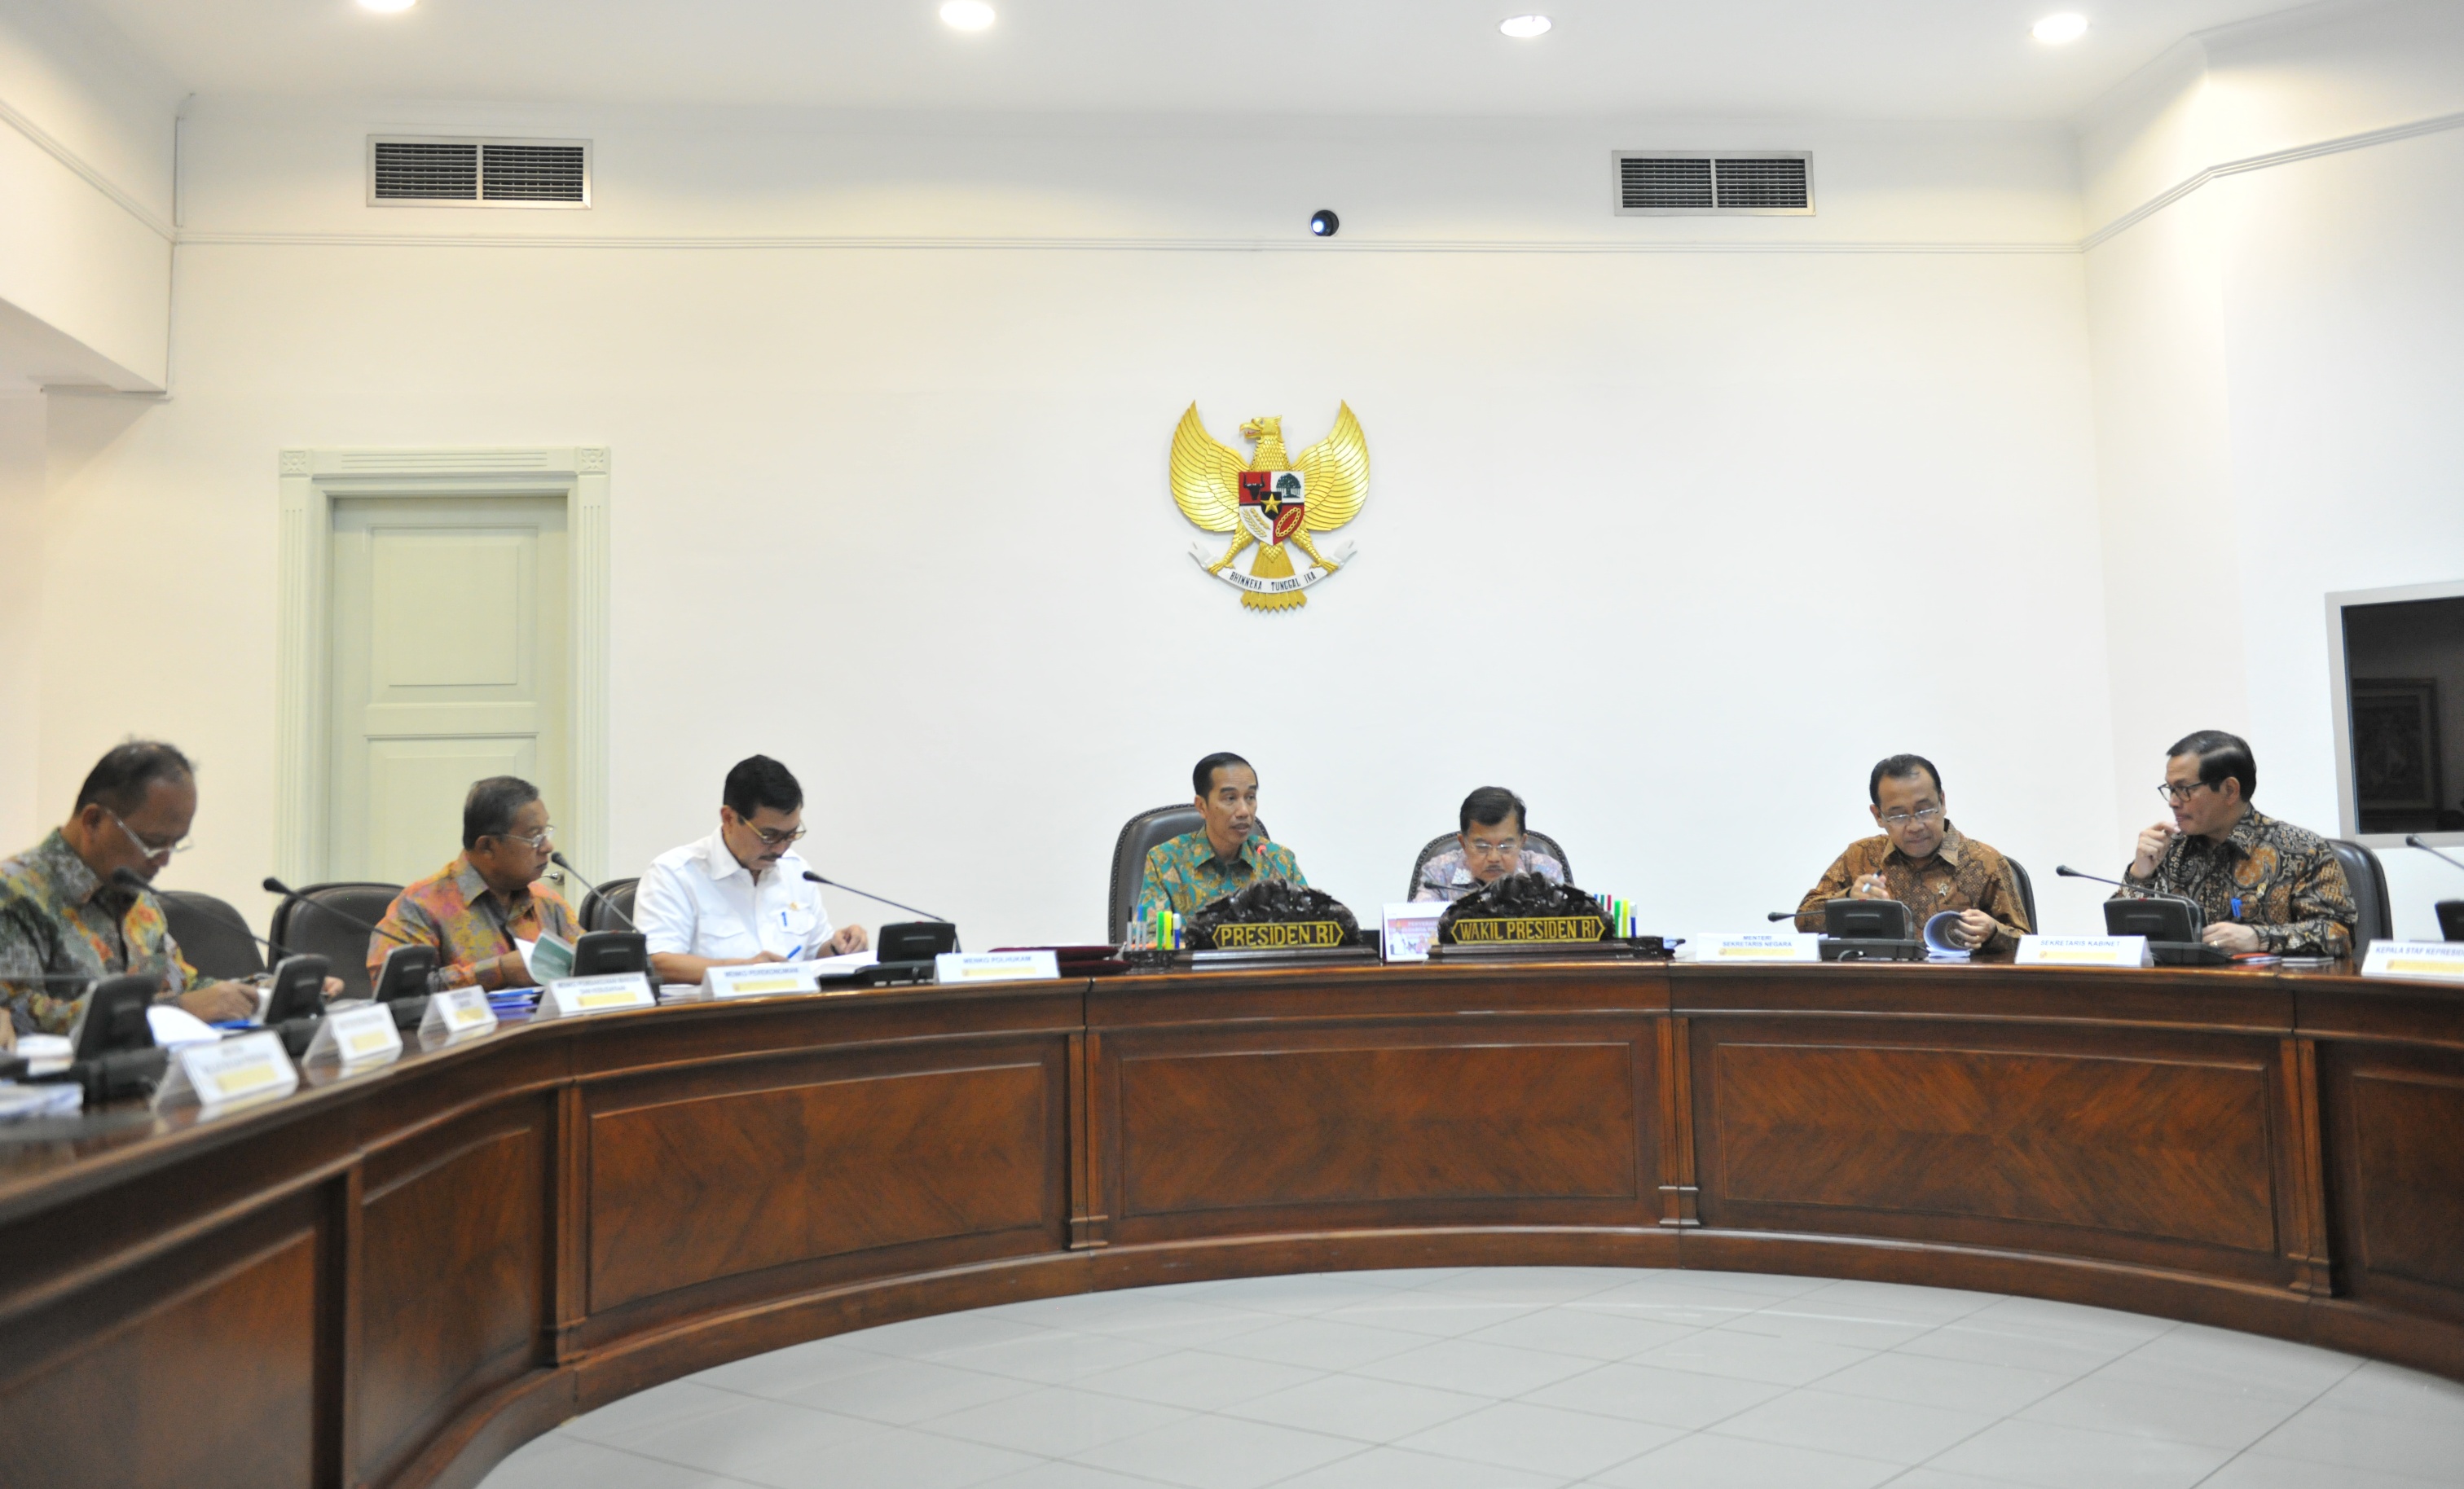 New And Renewable Energy Development Must Be Accelerated President Jokowi Says